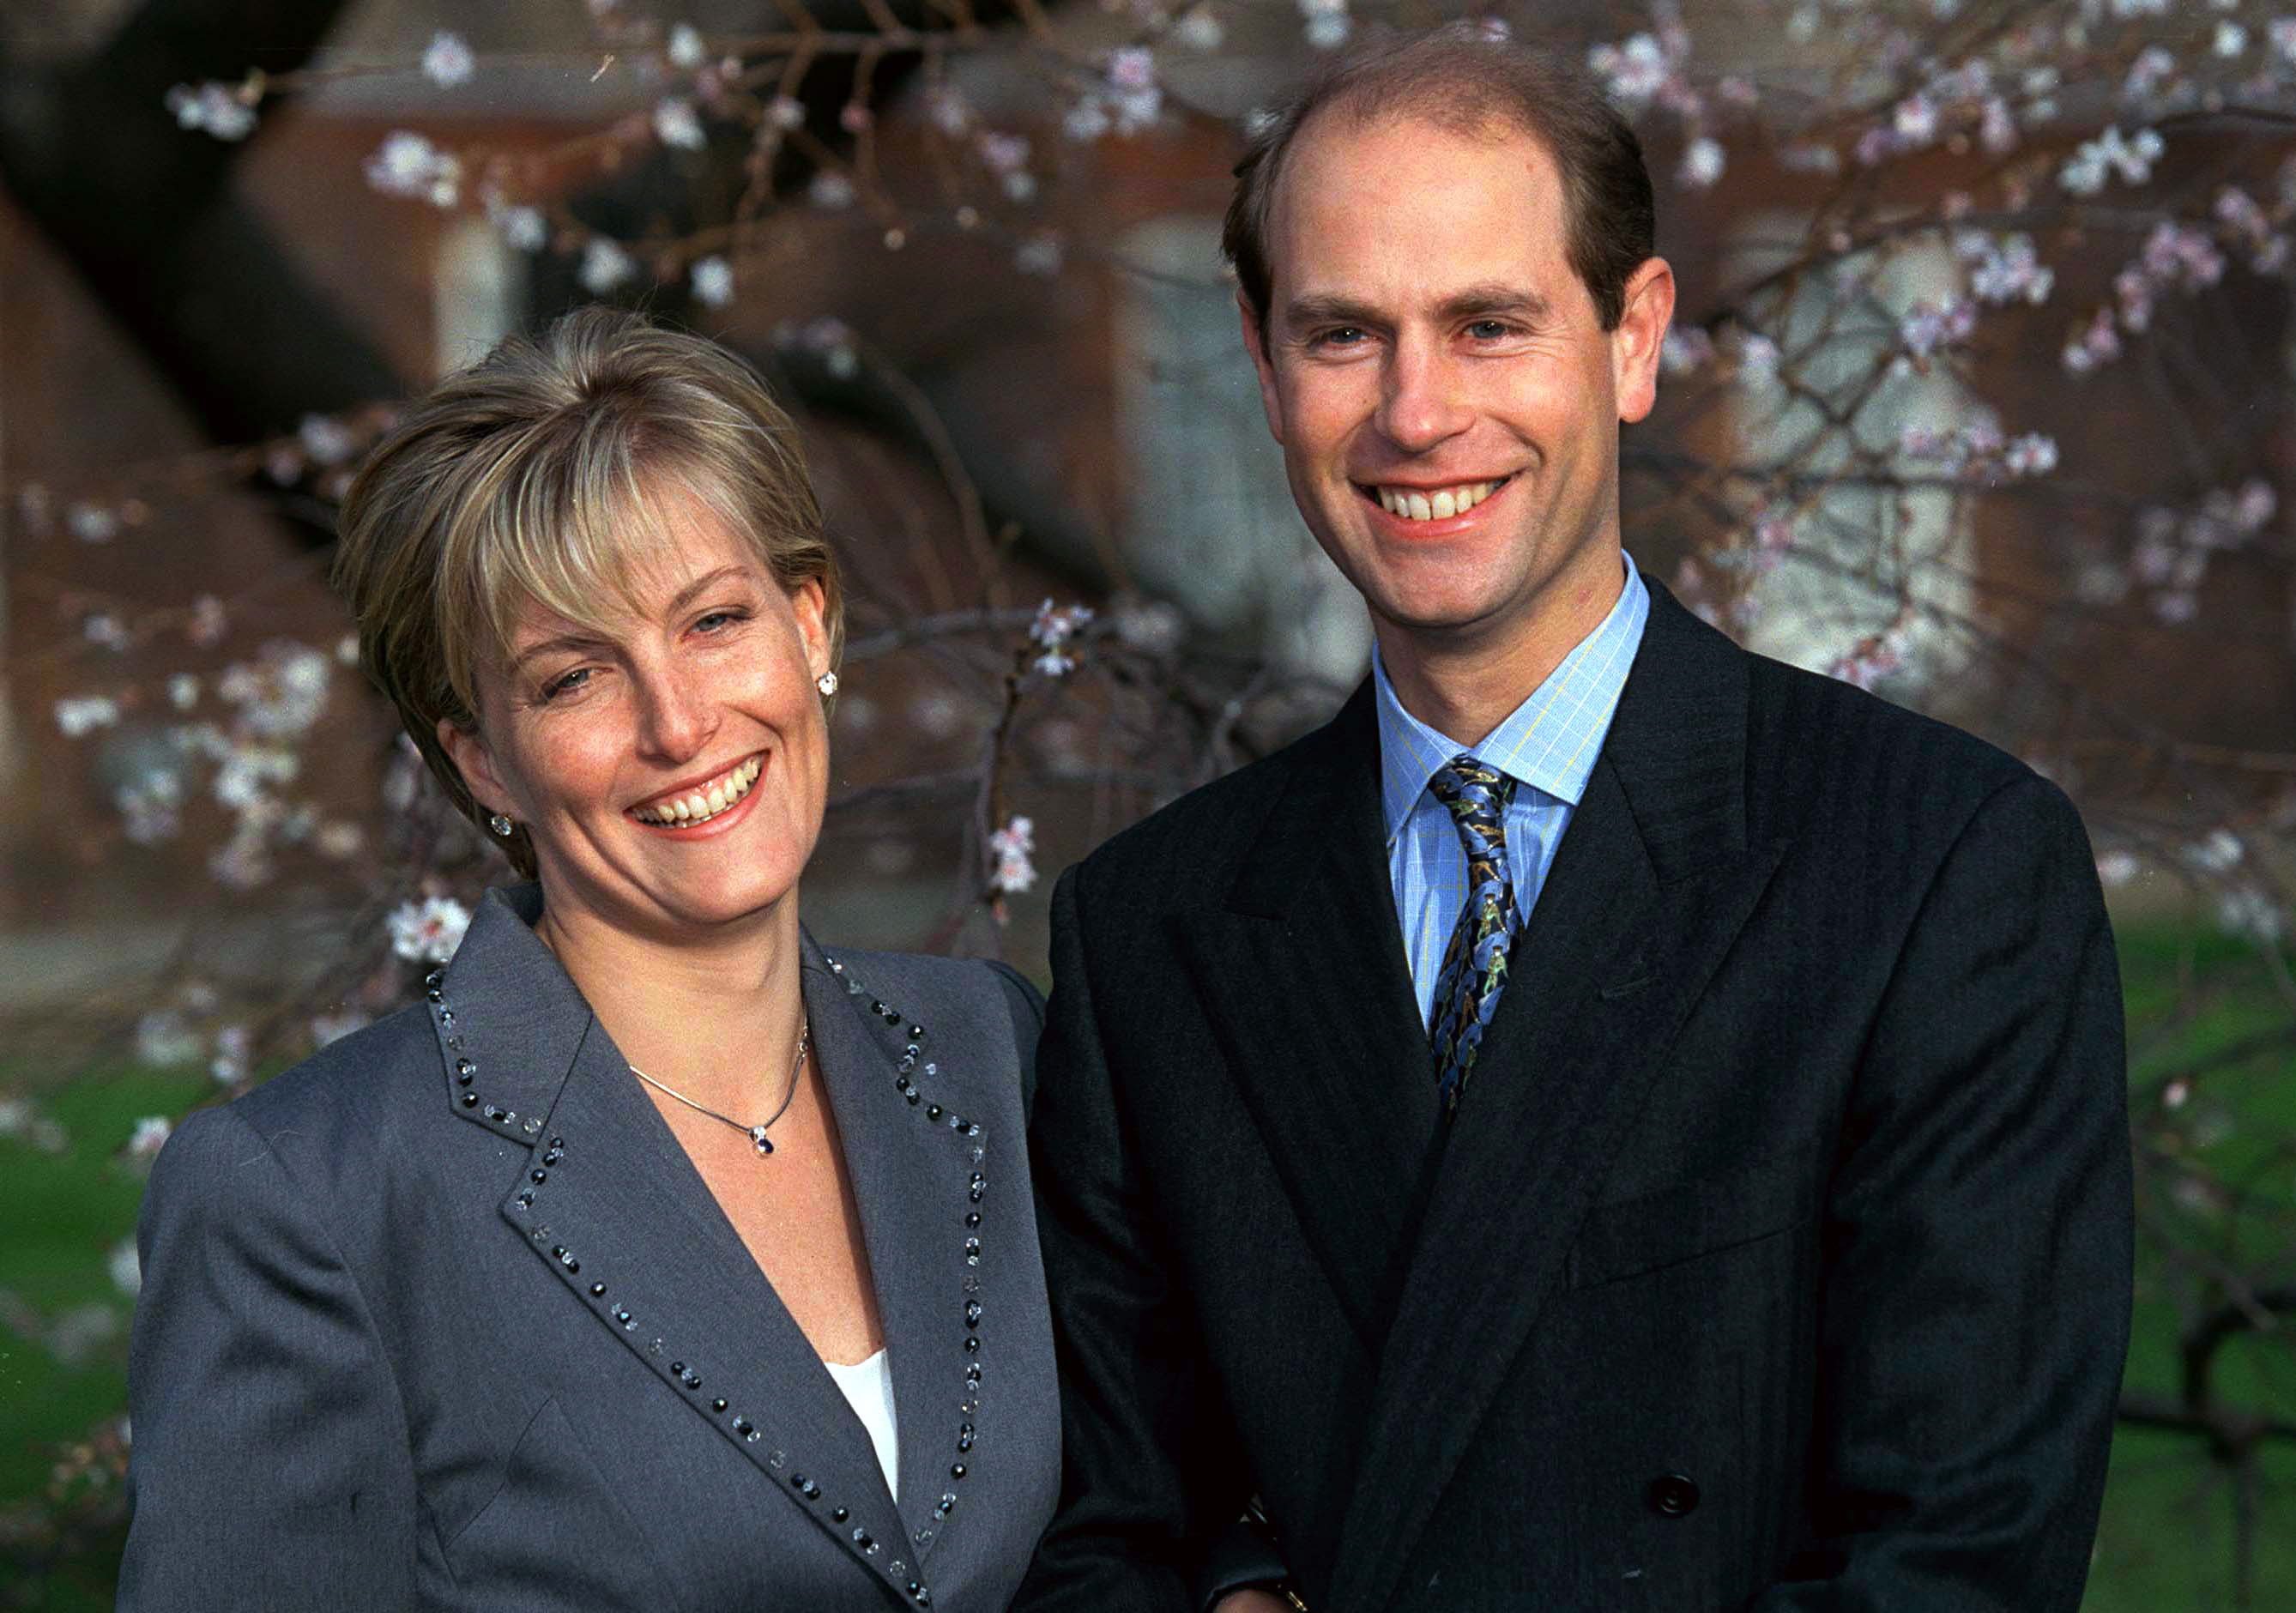 Prince Edward and Sophie Wessex in London on the day of their engagement 1999. | Source: Getty Images